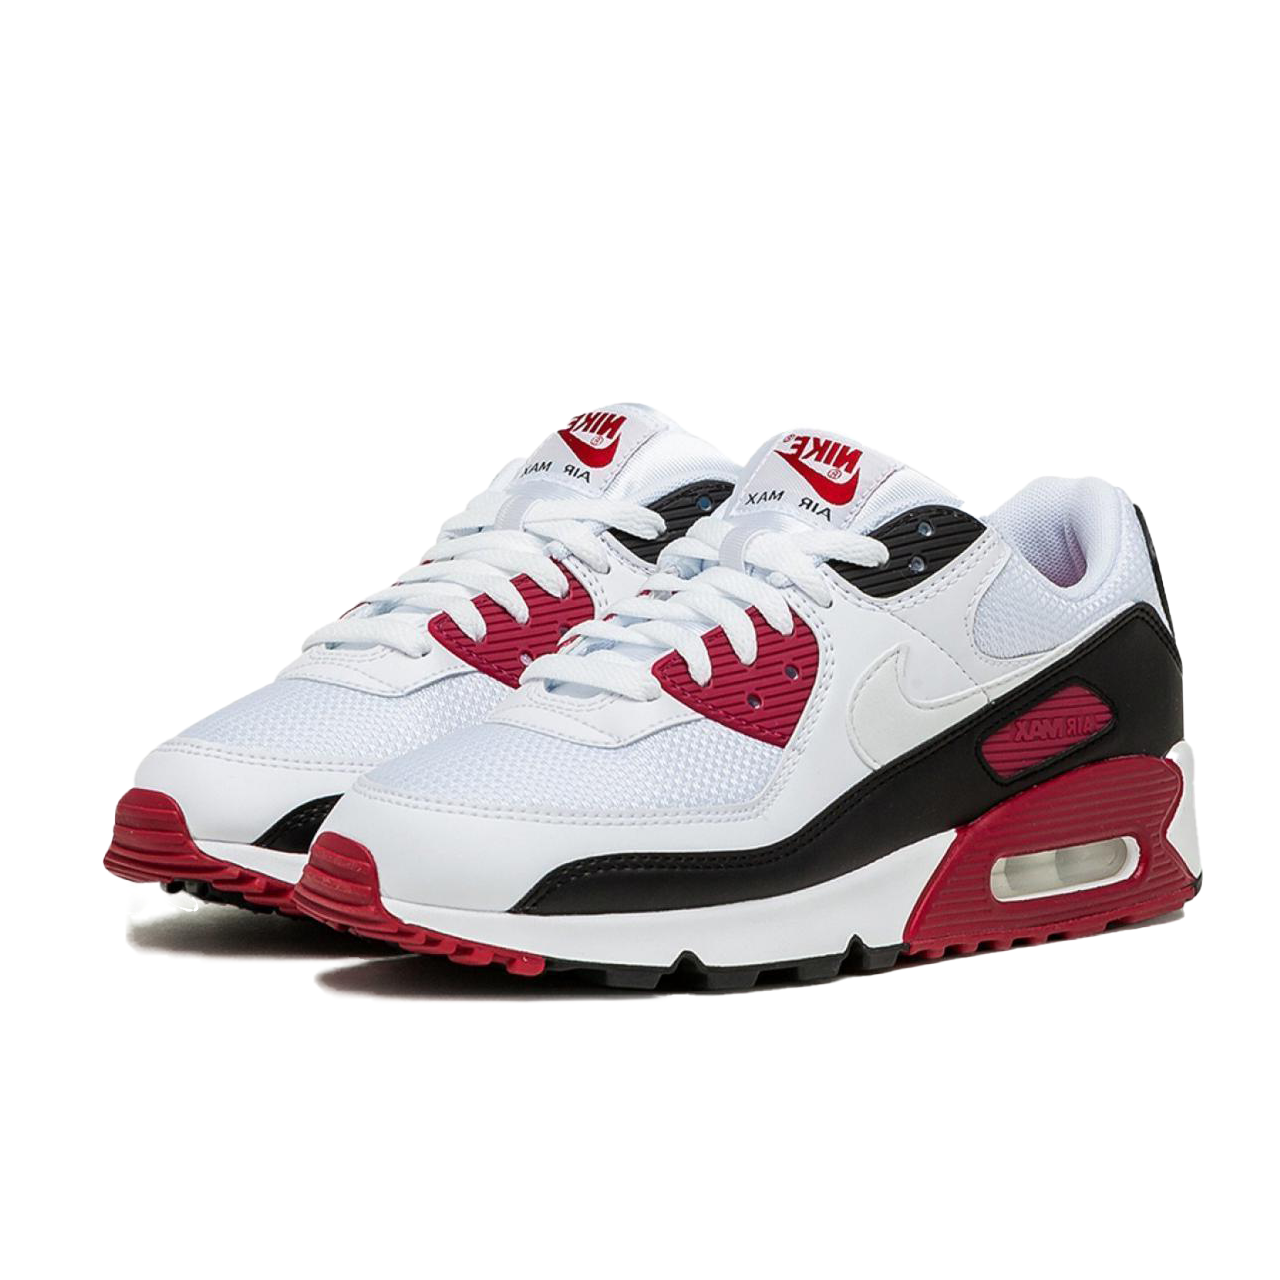 https://admin.thegioigiay.com/upload/product/2022/12/giay-the-thao-nike-air-max-90-recraft-new-maroon-size-39-63913b8c3a95d-08122022081908.png